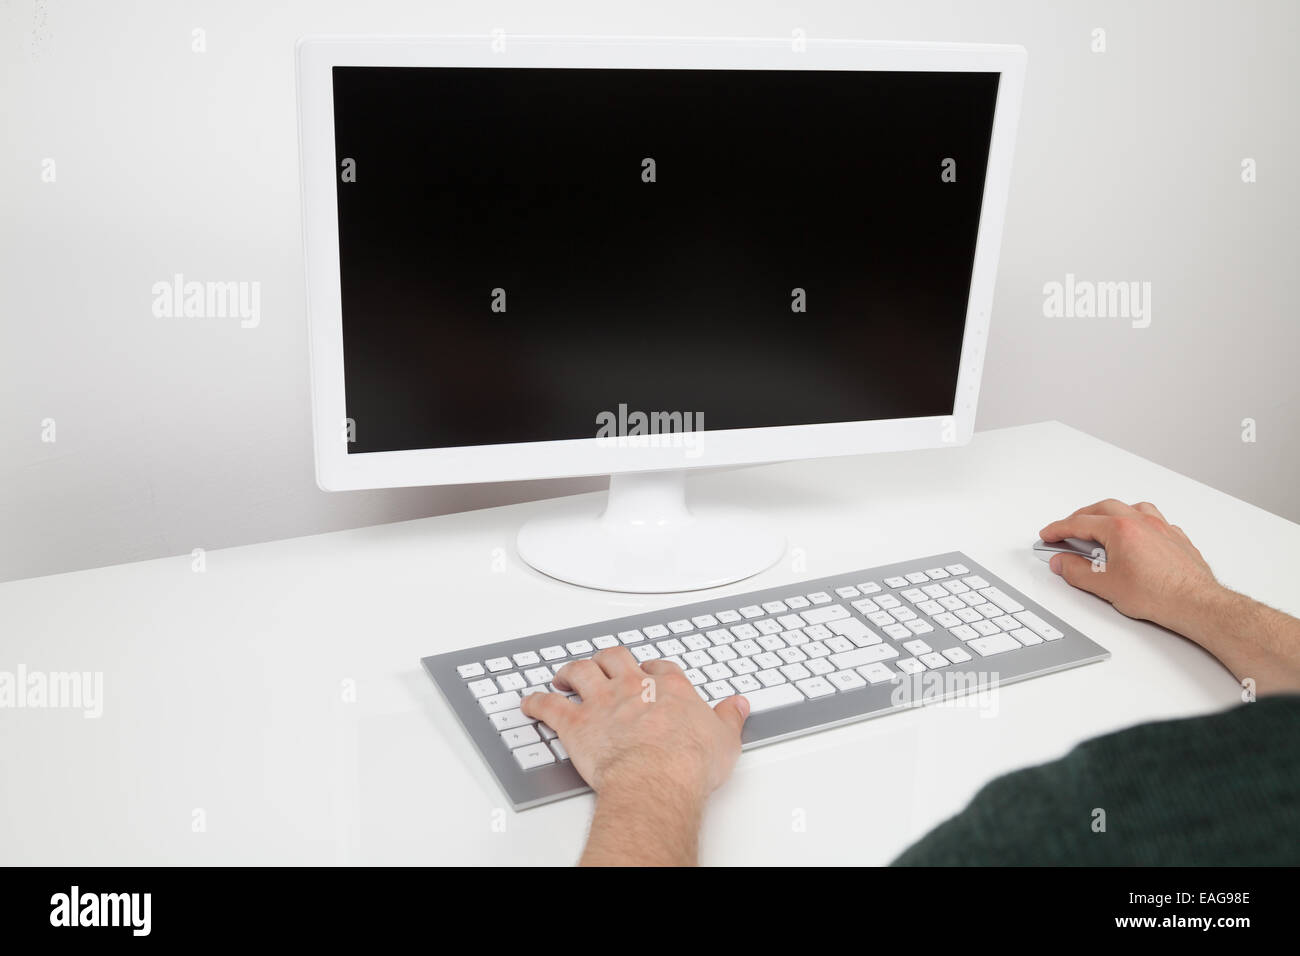 man typing on keyboard of a computer Stock Photo